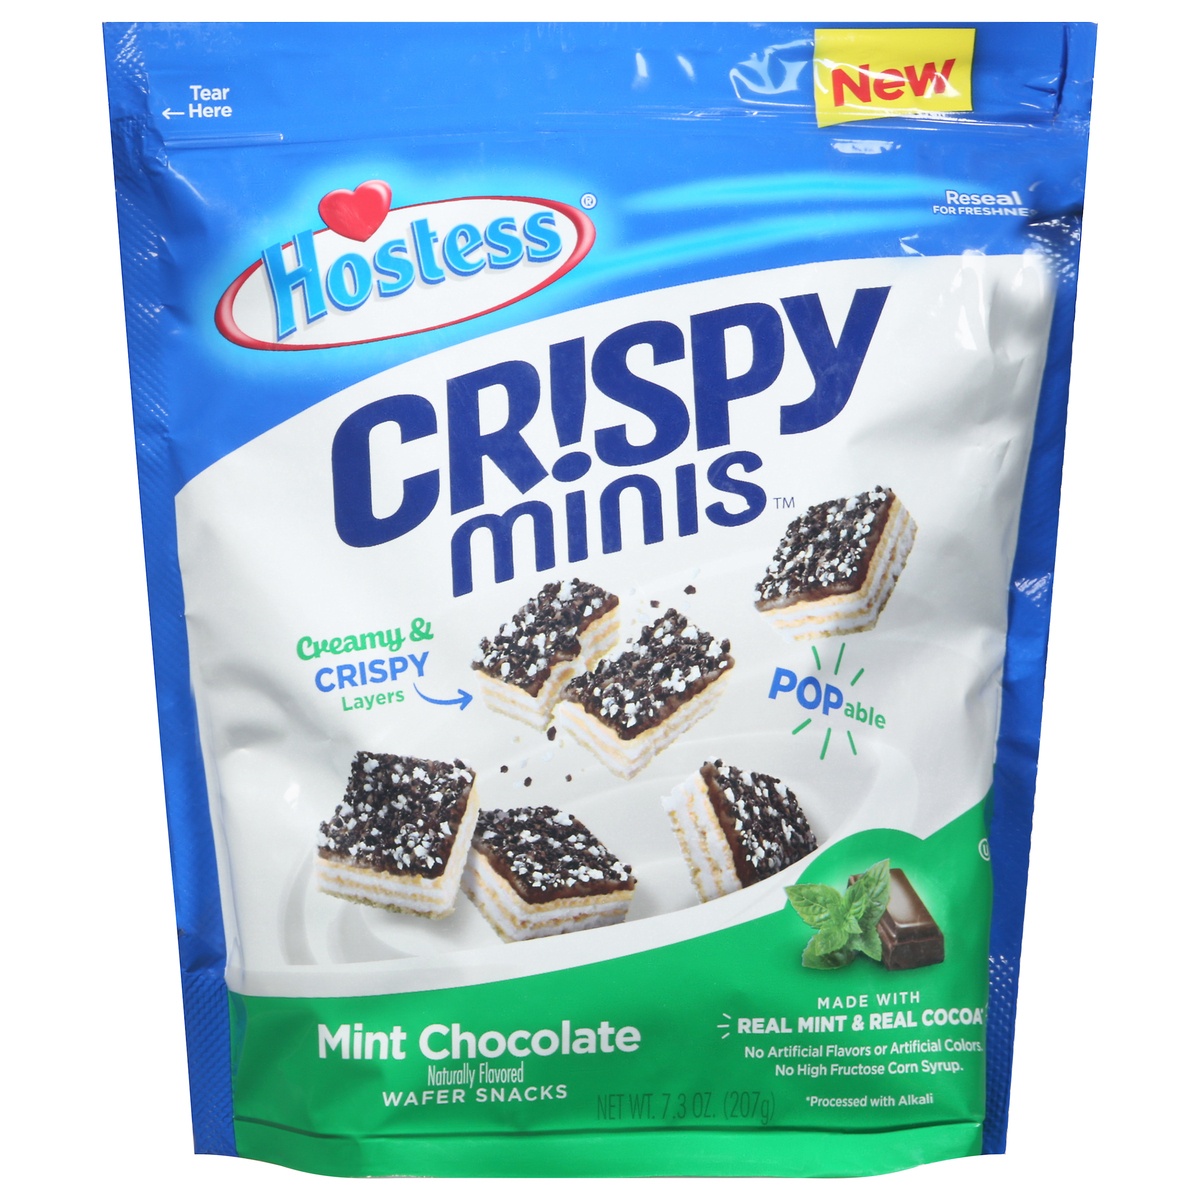 slide 1 of 1, Mint Chocolate Hostess Crispy Minis, Mini Wafers, Made with Real Mint and Real Cocoa, Resealable Bag, 7.3 oz